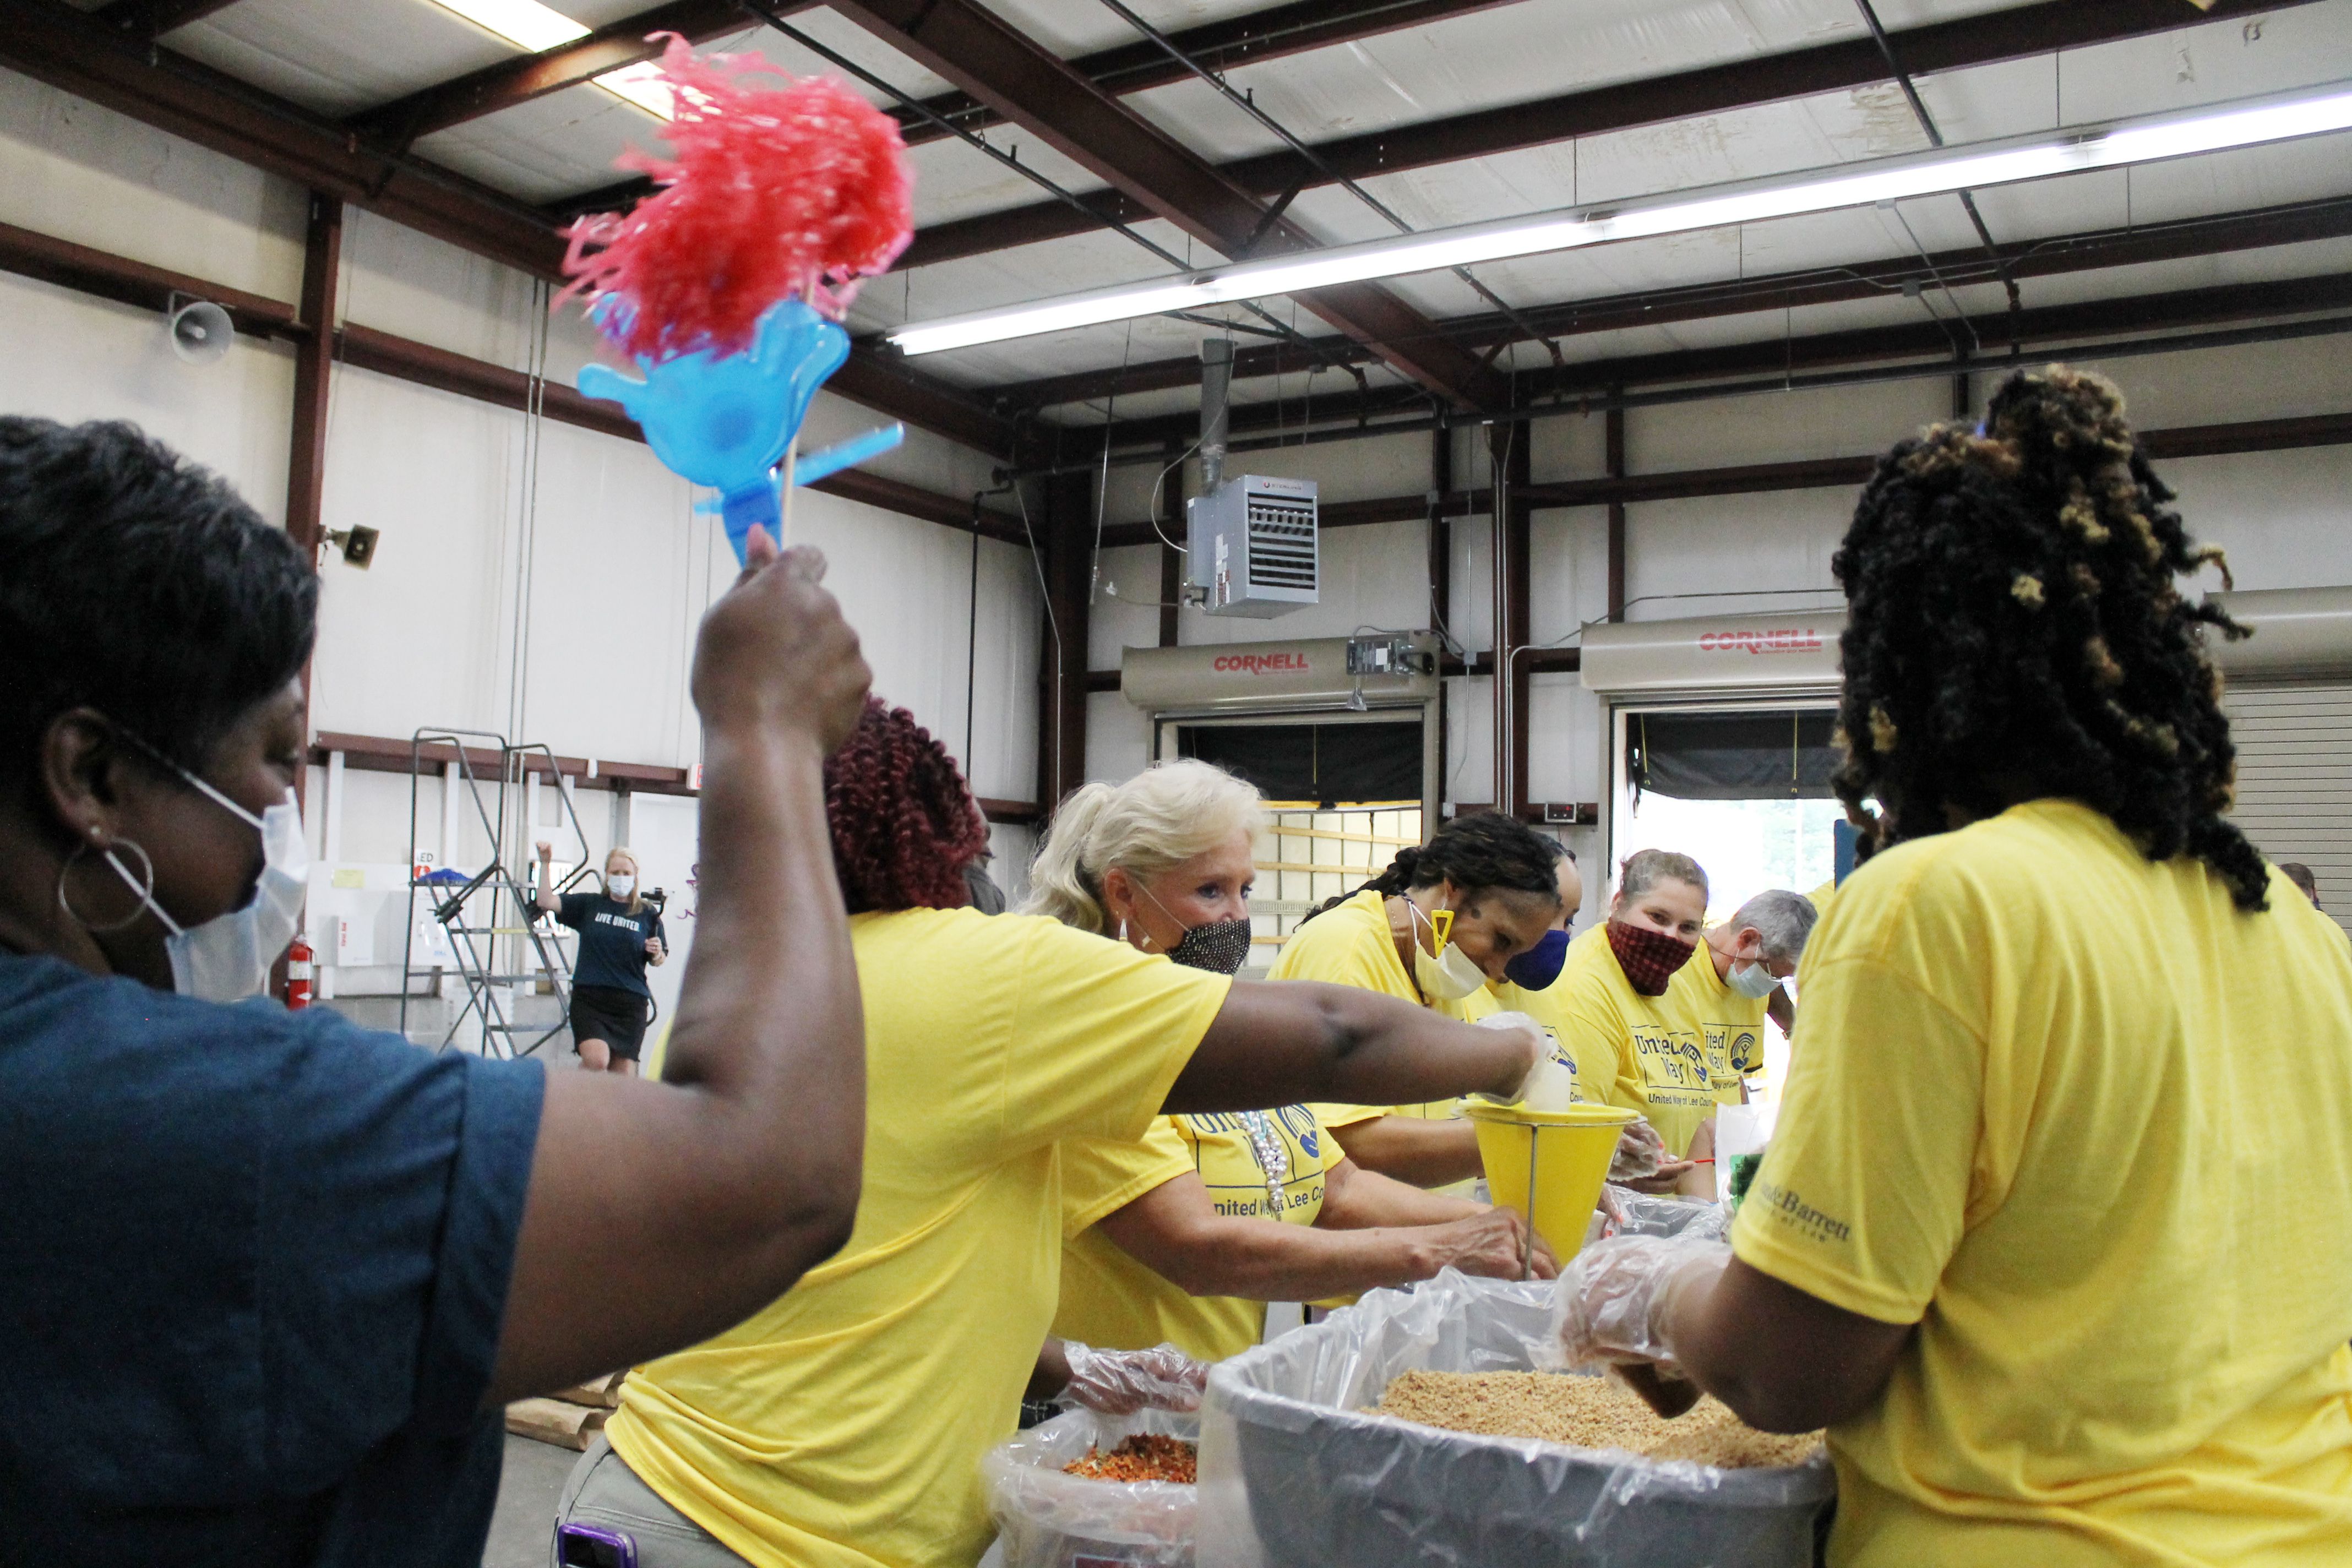 Volunteers packing food while the lead cheers them on